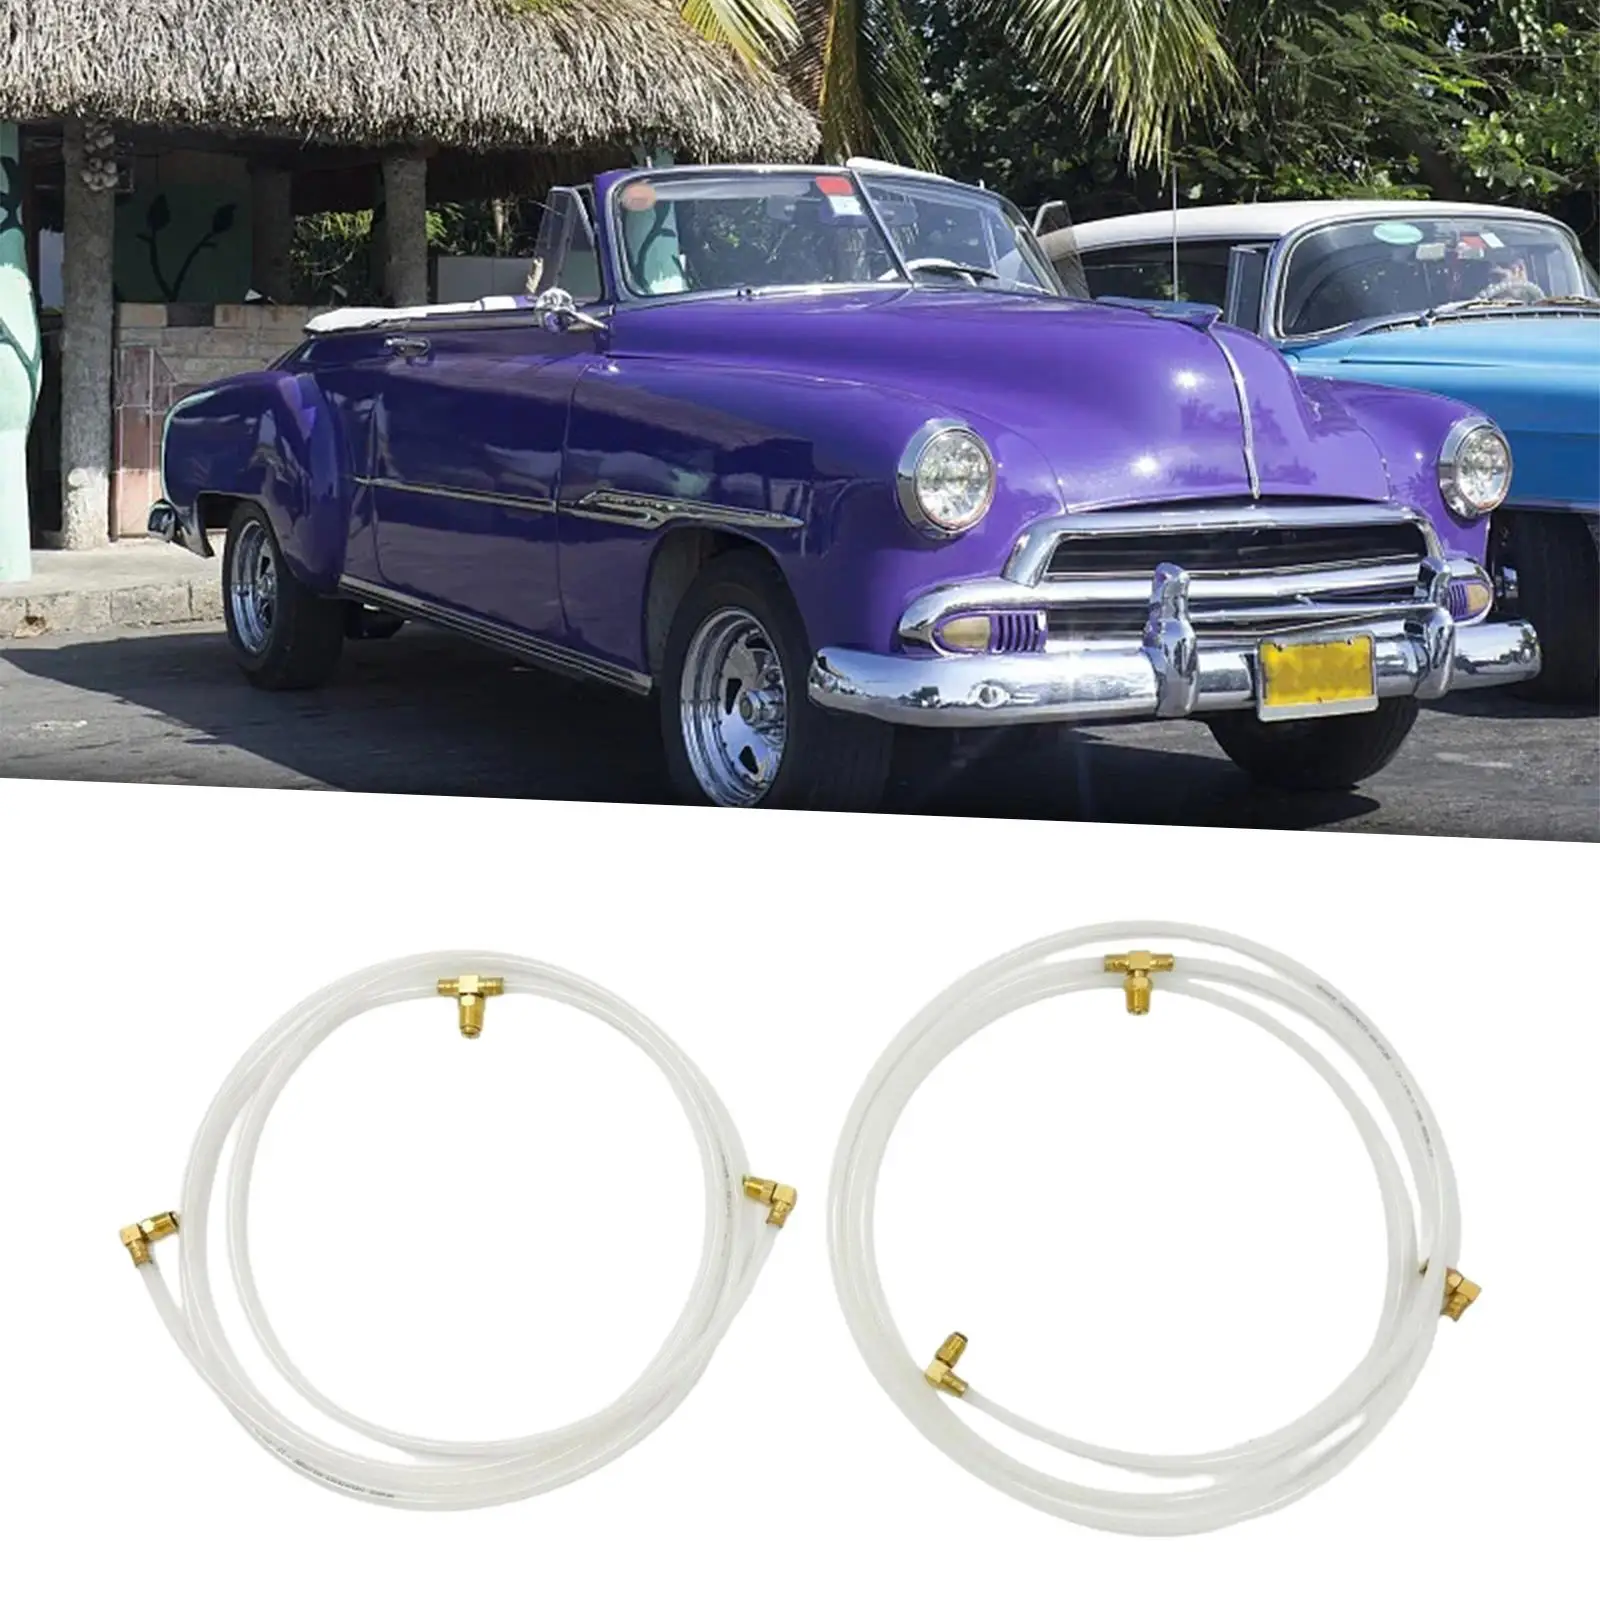 Pair Convertible Top Hydraulic Fluid Hose Lines Convertible Top Hose Set for Chevrolet Chevy II Corvair Impala Accessories